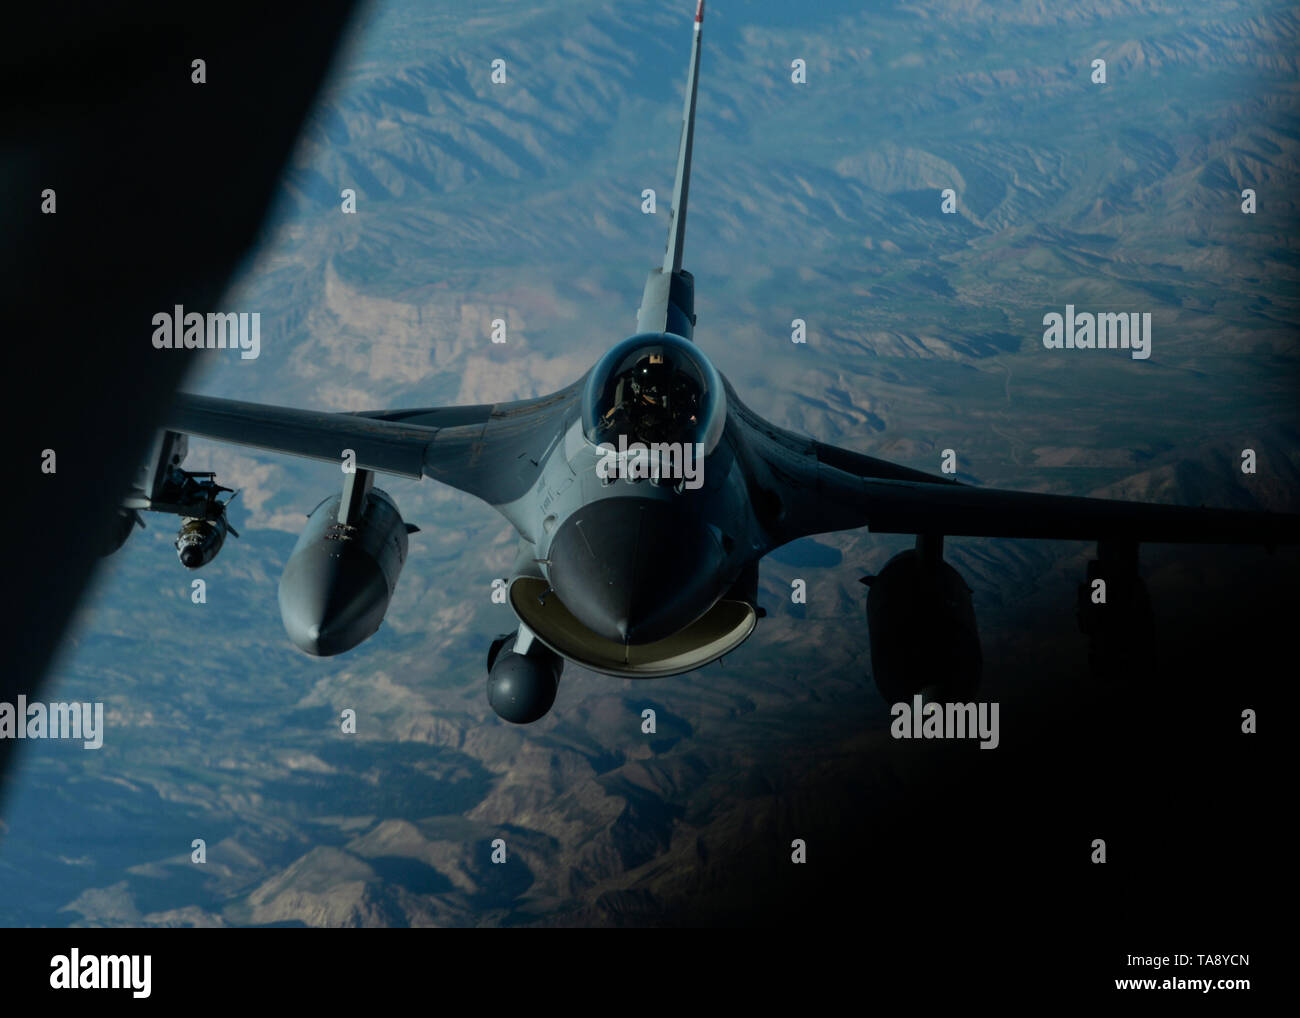 A U.S. Air Force F-16 Fighting Falcon prepares to connect with a KC-135 Stratotanker assigned to the 340th Expeditionary Air Refueling Squadron out of Kandahar Airfield, Afghanistan, during an aerial refueling mission above an undisclosed location May 14, 2019. The F-16 fills a critical role of enabling local security, and close air support to coalition forces on the ground. (U.S. Air Force photo by Staff Sgt. Chris Drzazgowski) Stock Photo